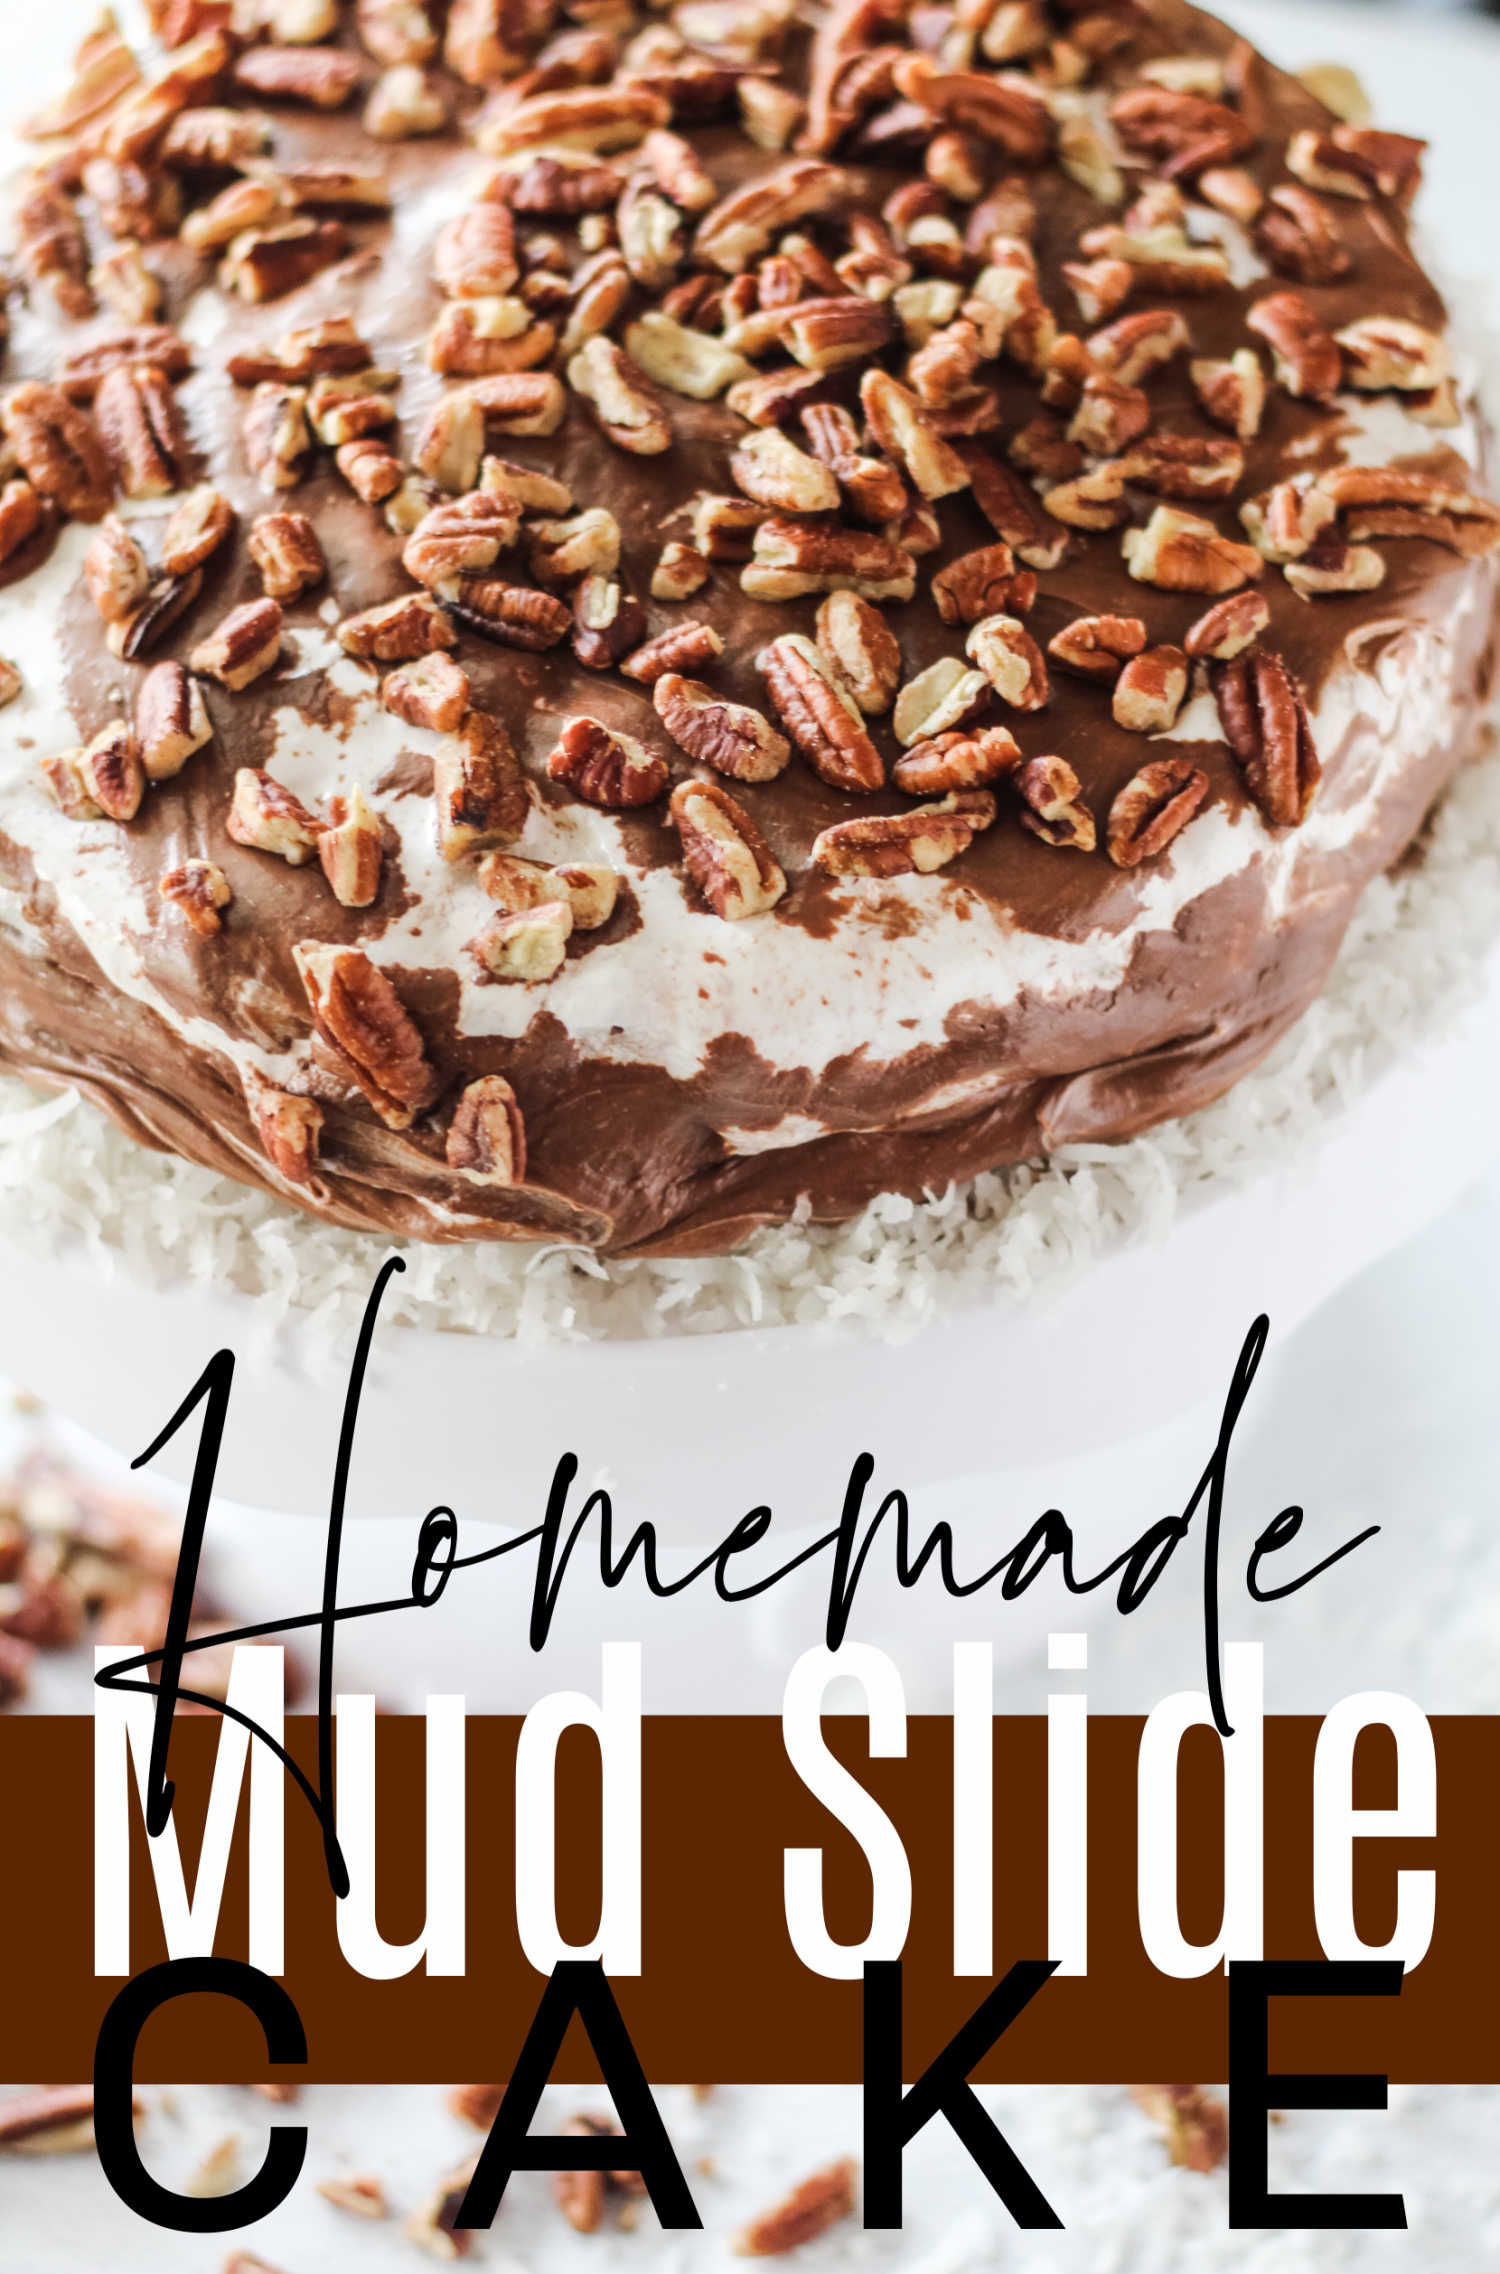 Mississippi mudslide cake pairs a homemade chocolate cake with pecans, coconut, marshmallows and fudgy icing. It is decadent, delicious and loaded with goodness.